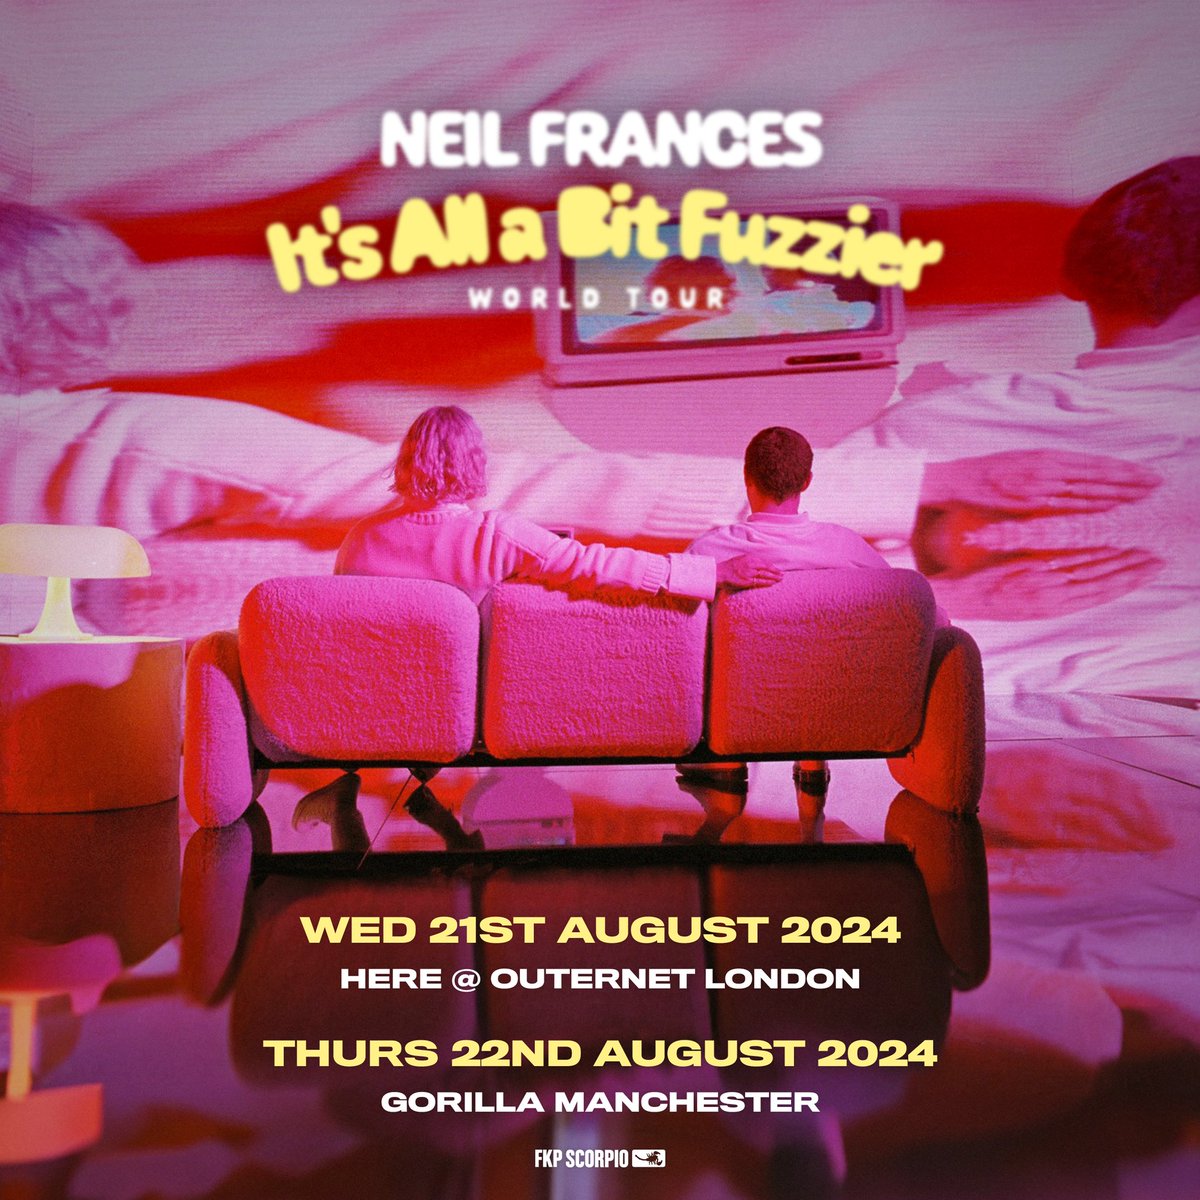 LA duo @Neil_Frances_ are coming to the UK for the first time ever! They’ll be bringing their latest album ‘It’s All a Bit Fuzzy’ to London & Manchester this August. Tickets on sale Friday 10am